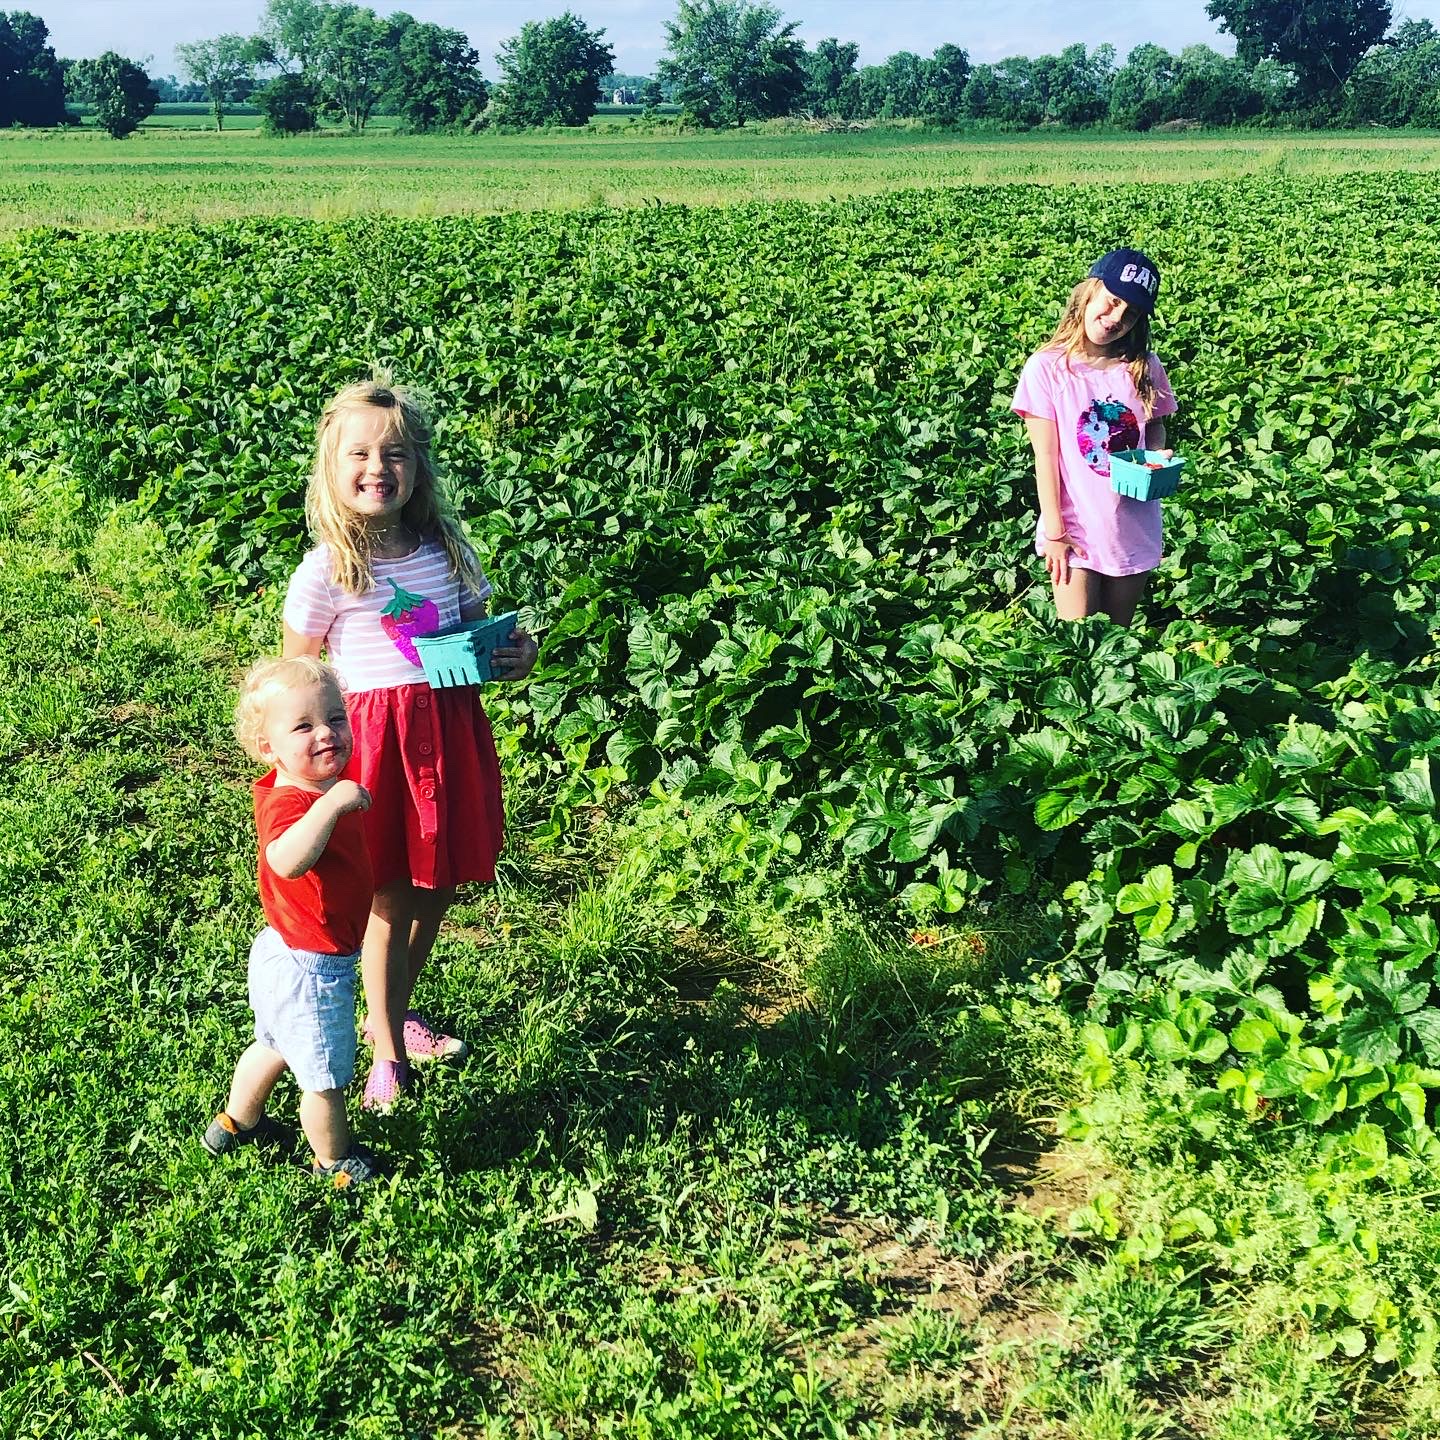 Strawberry Picking in Central Ohio